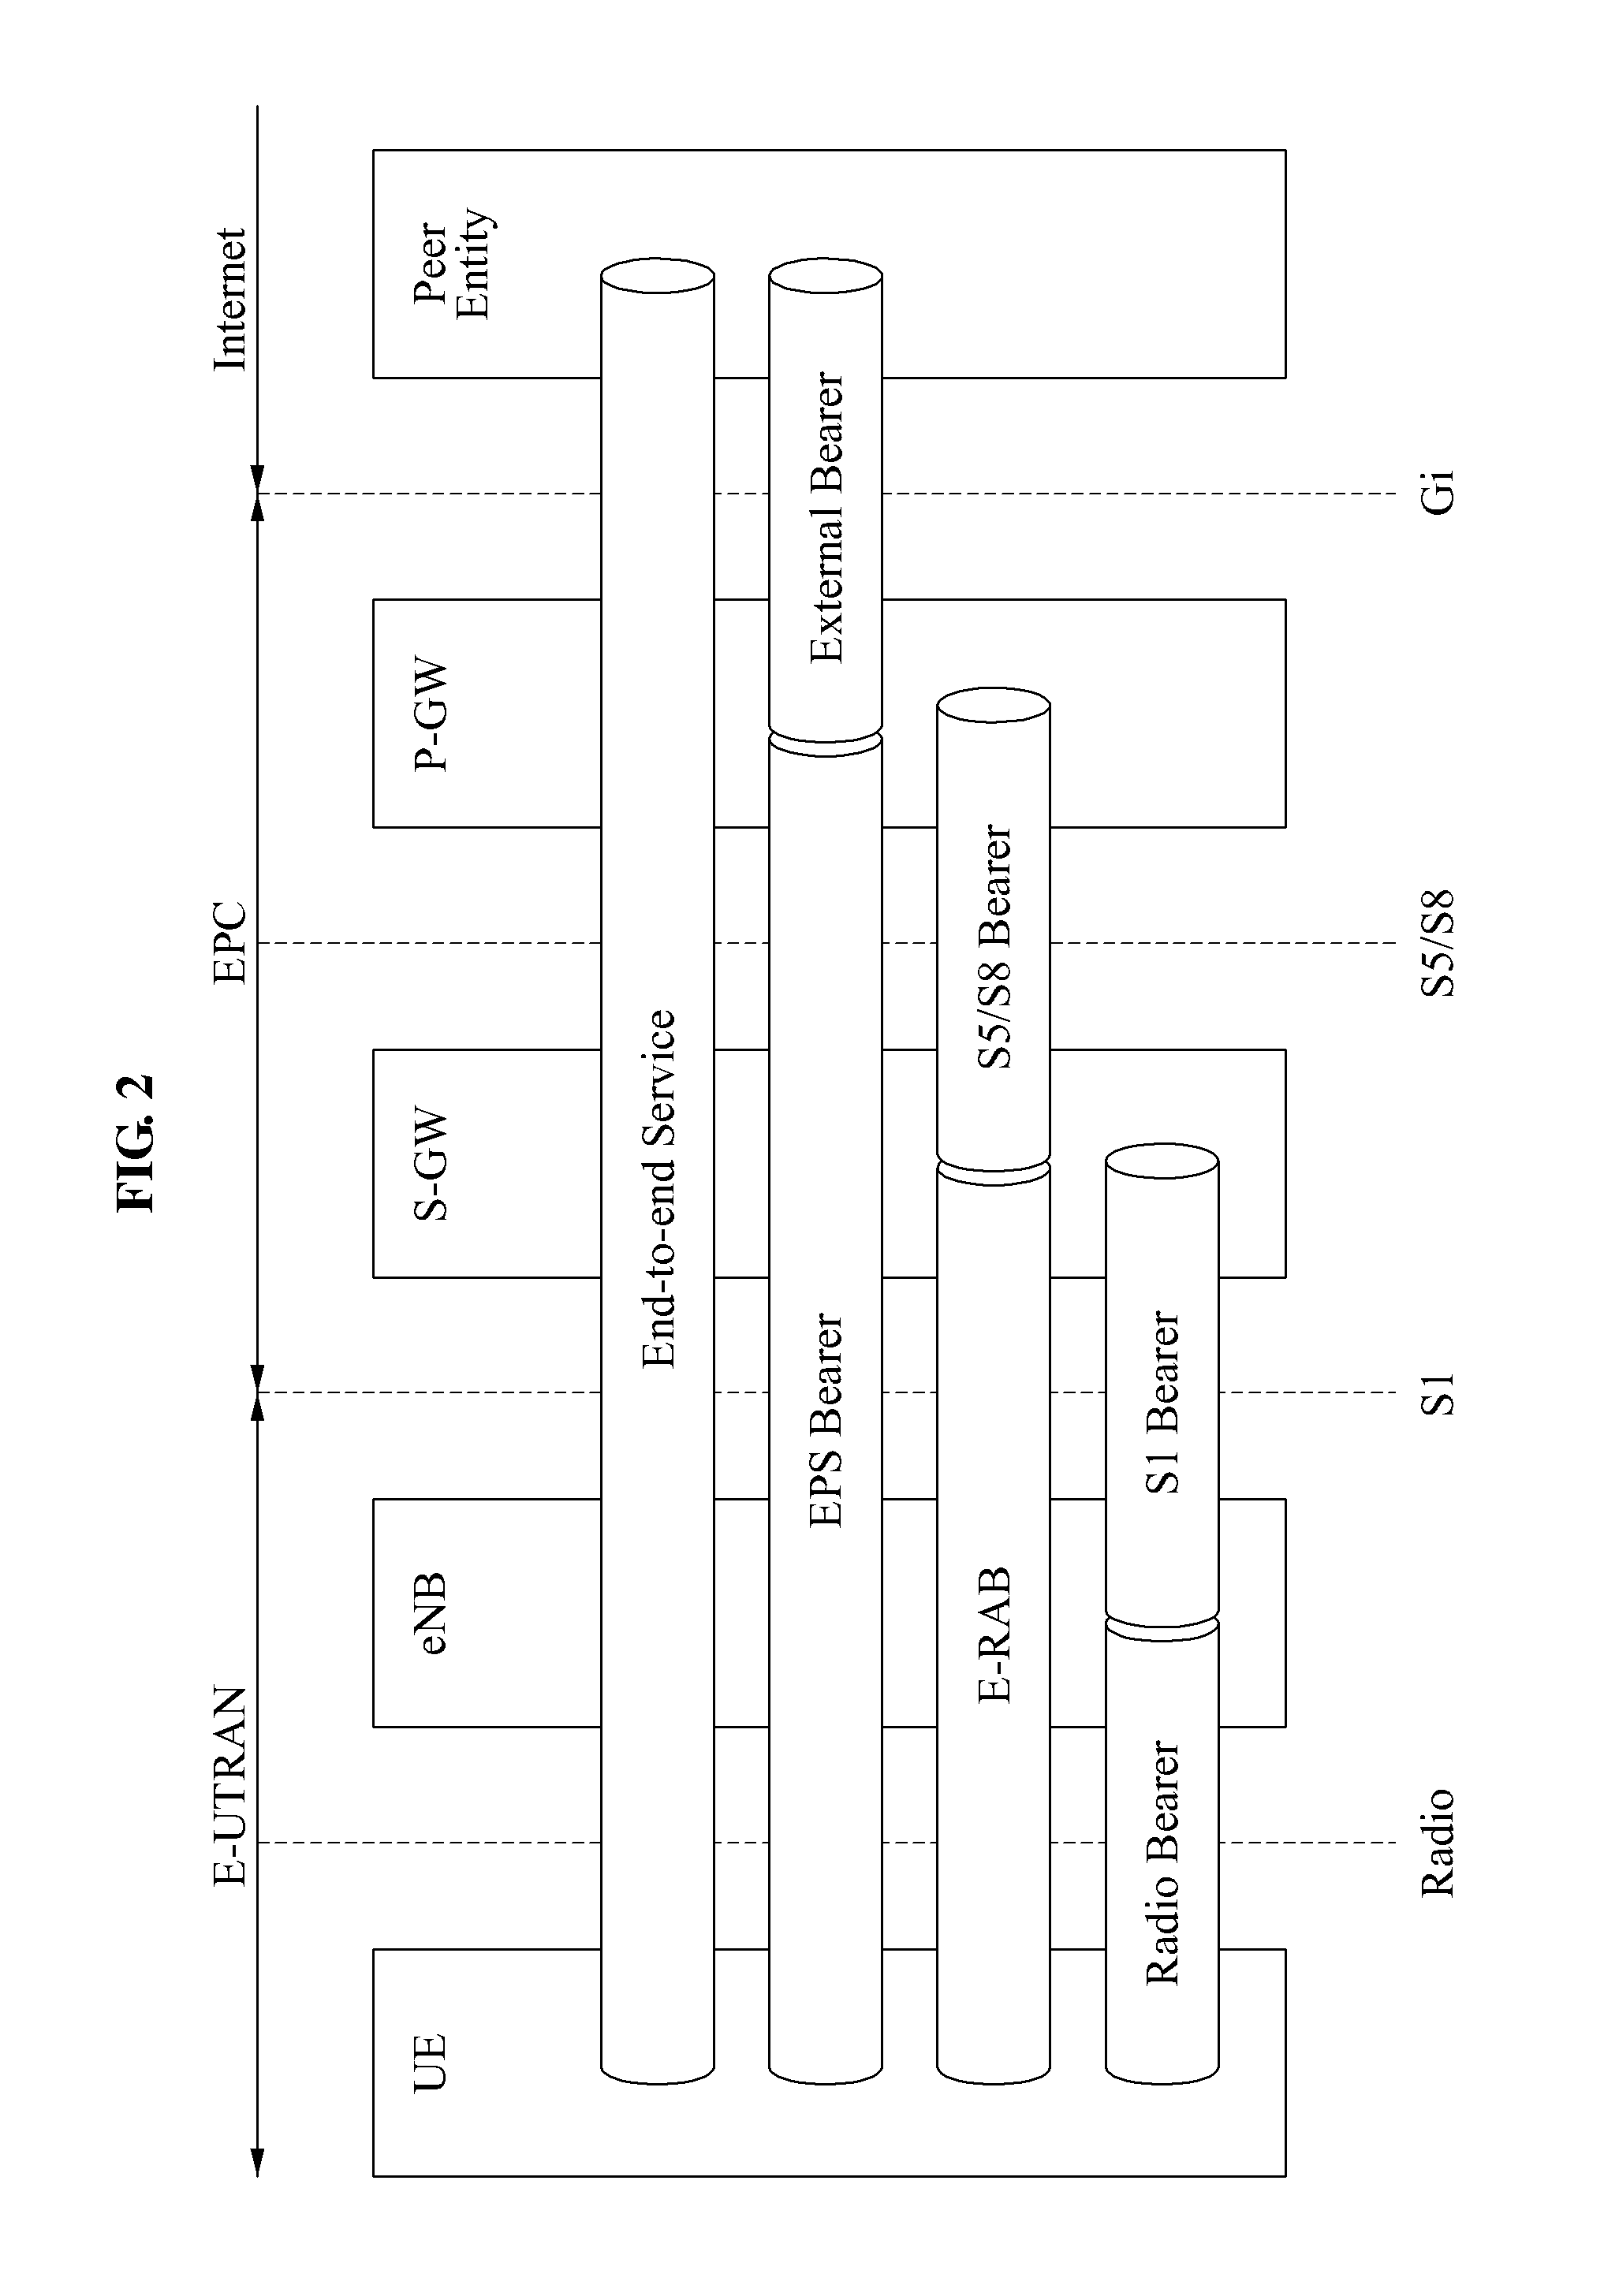 System and method to mitigate interference of 3gpp LTE heterogeneous network according to priority of service